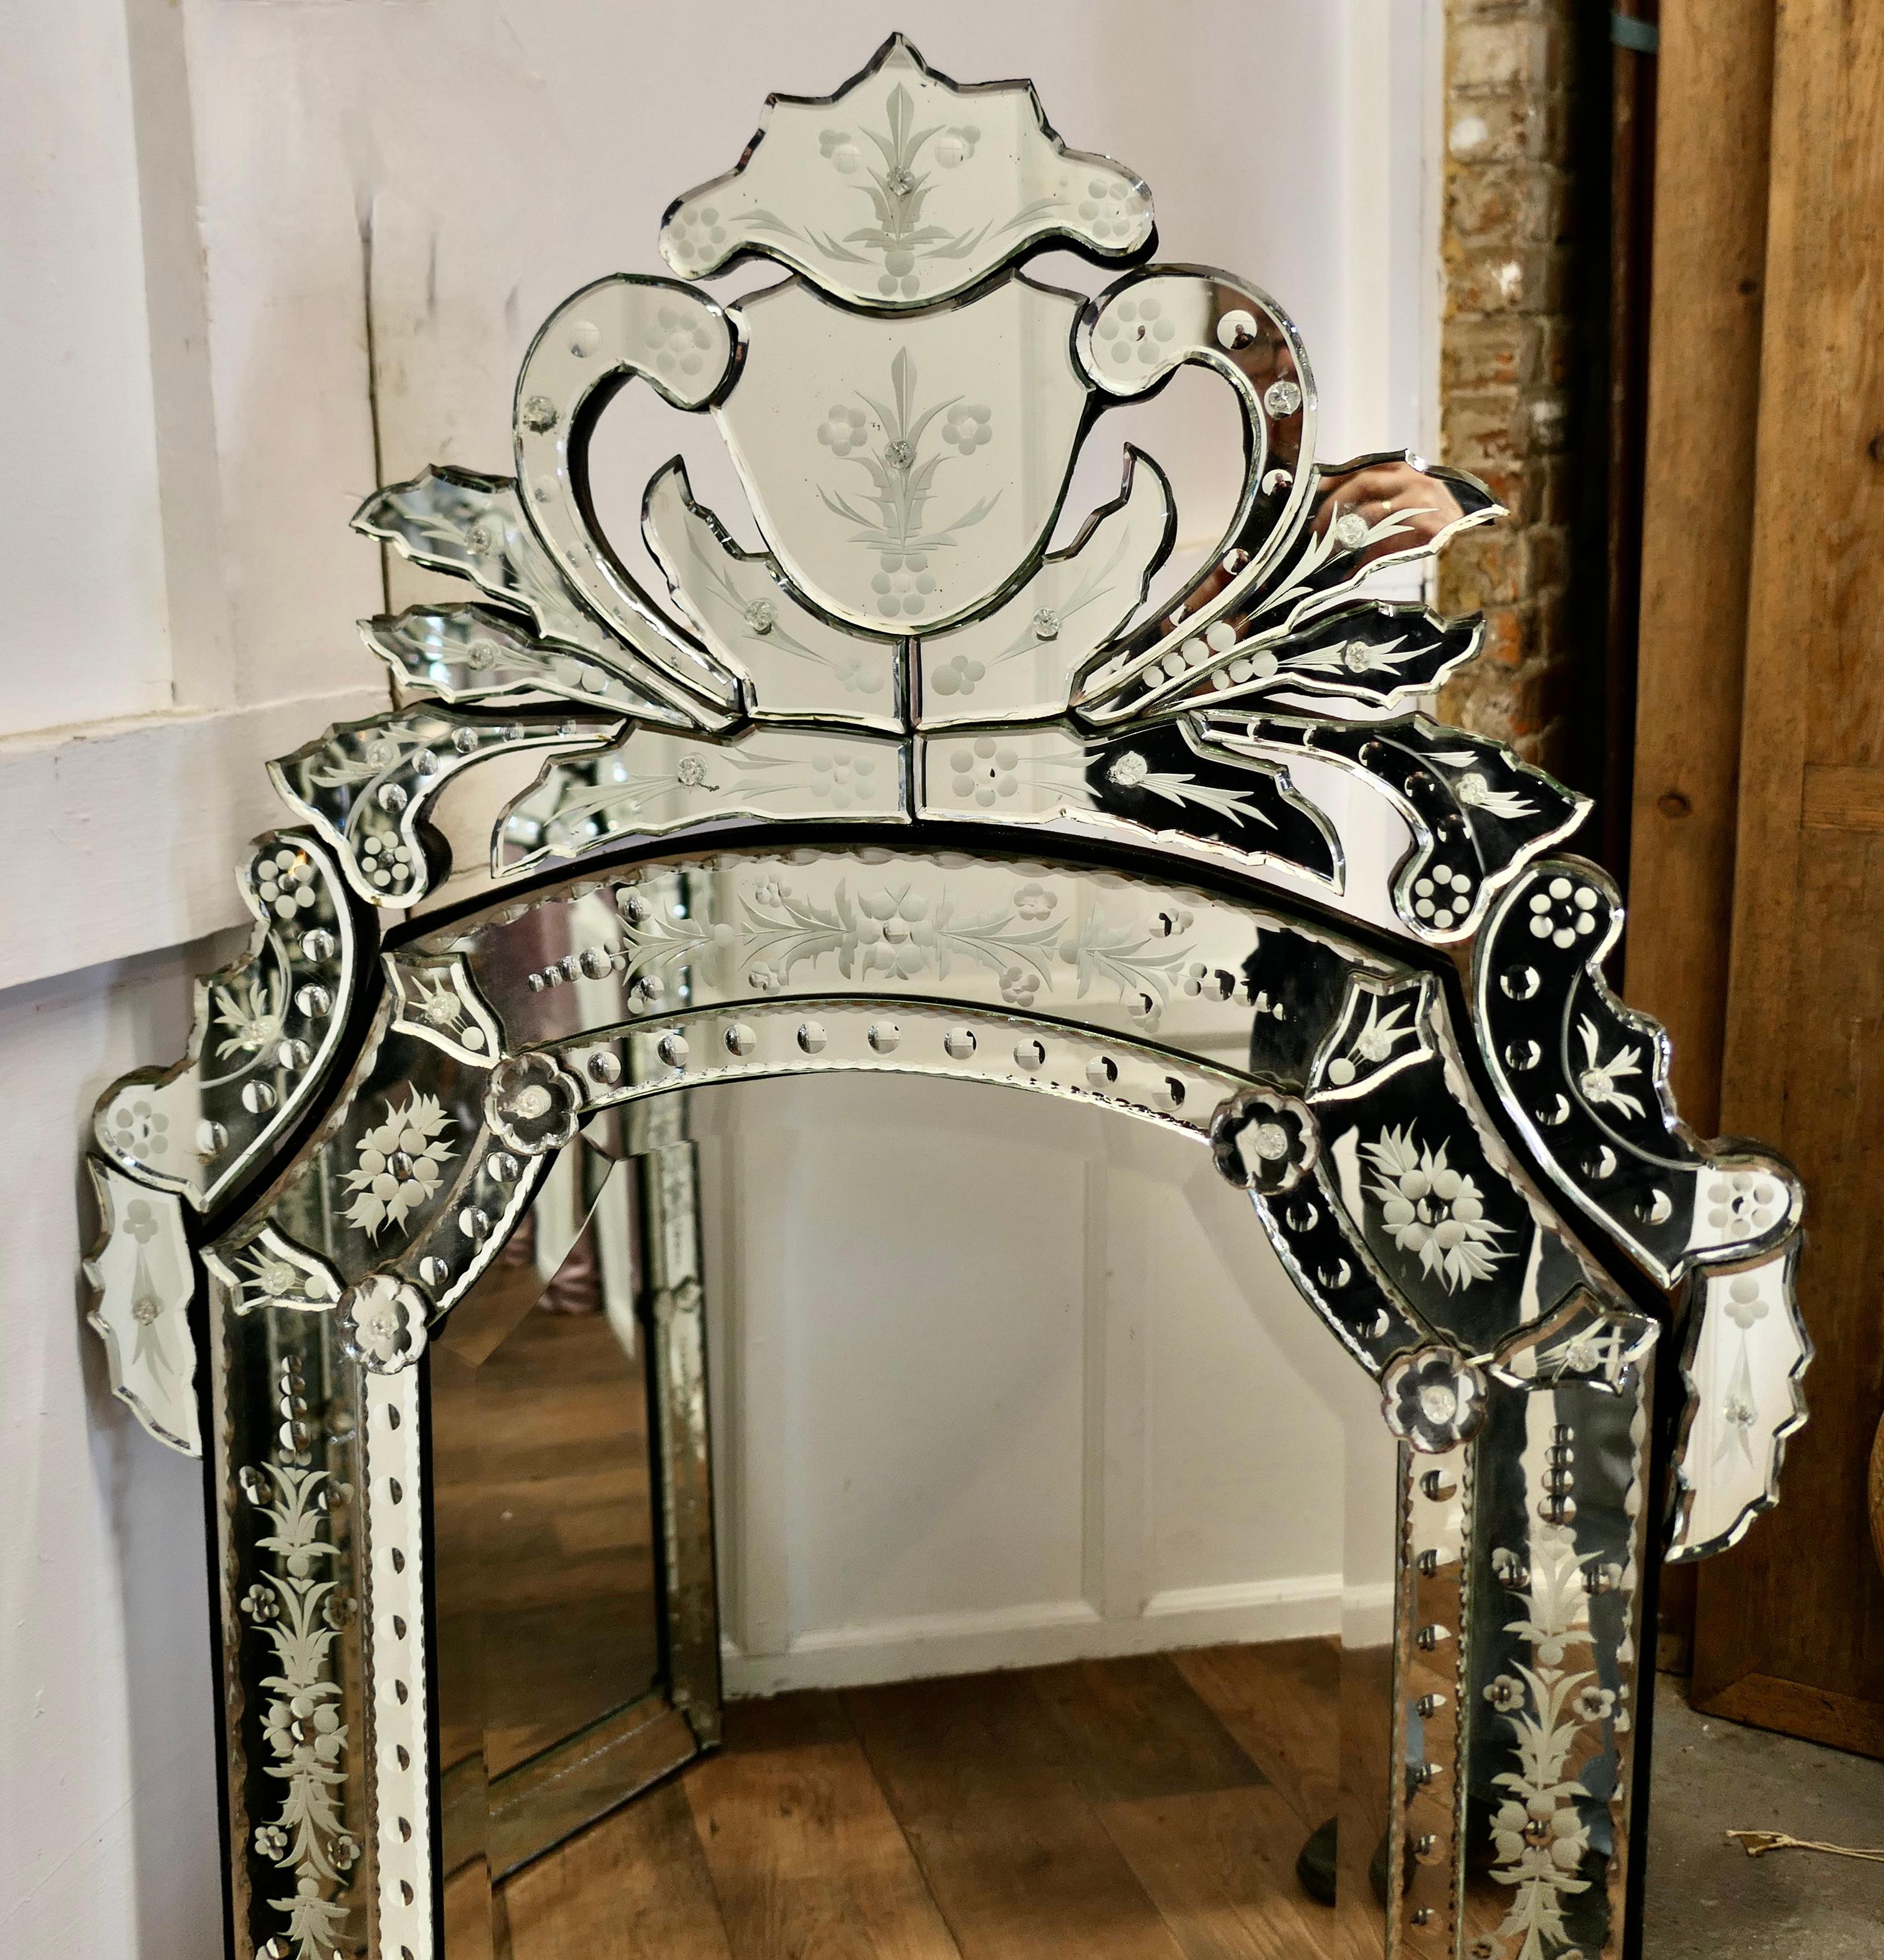 A Superb Pair of Large Venetian Pier Mirrors  These are  most outstanding pieces 2